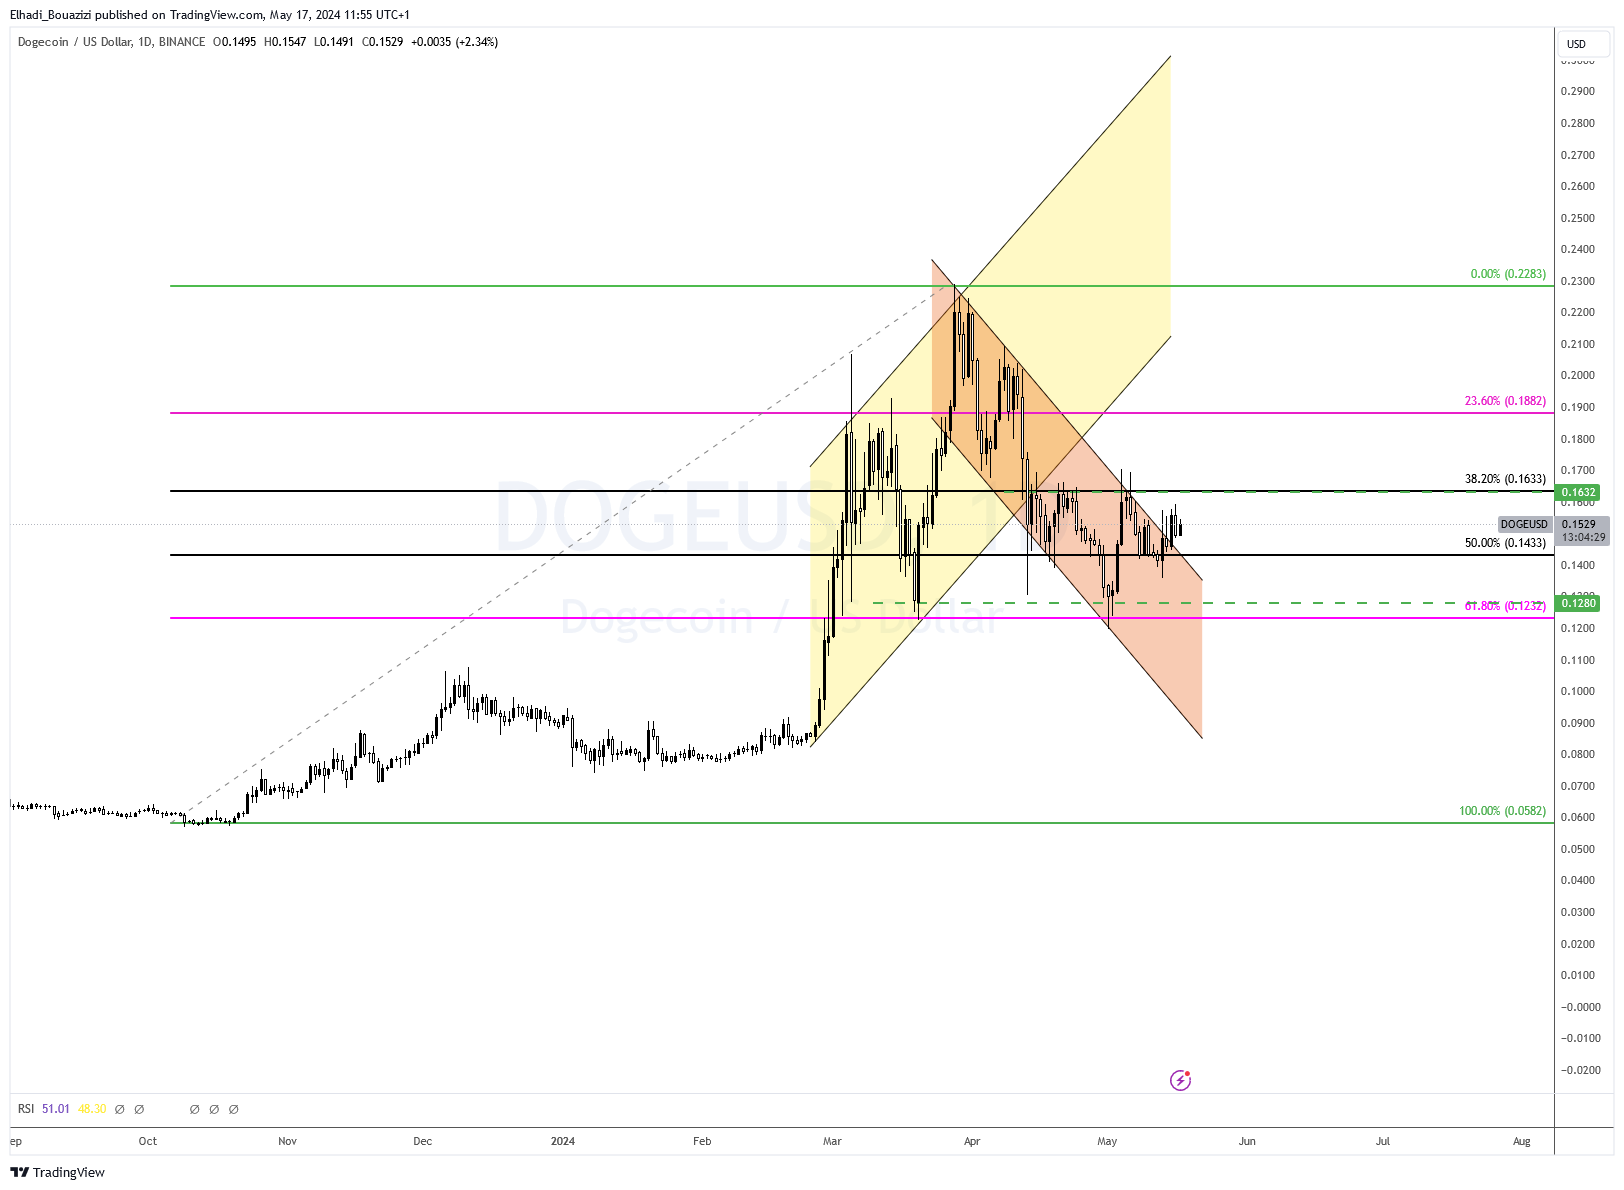 Dogecoin (DOGE) daily price chart Source: TradingView